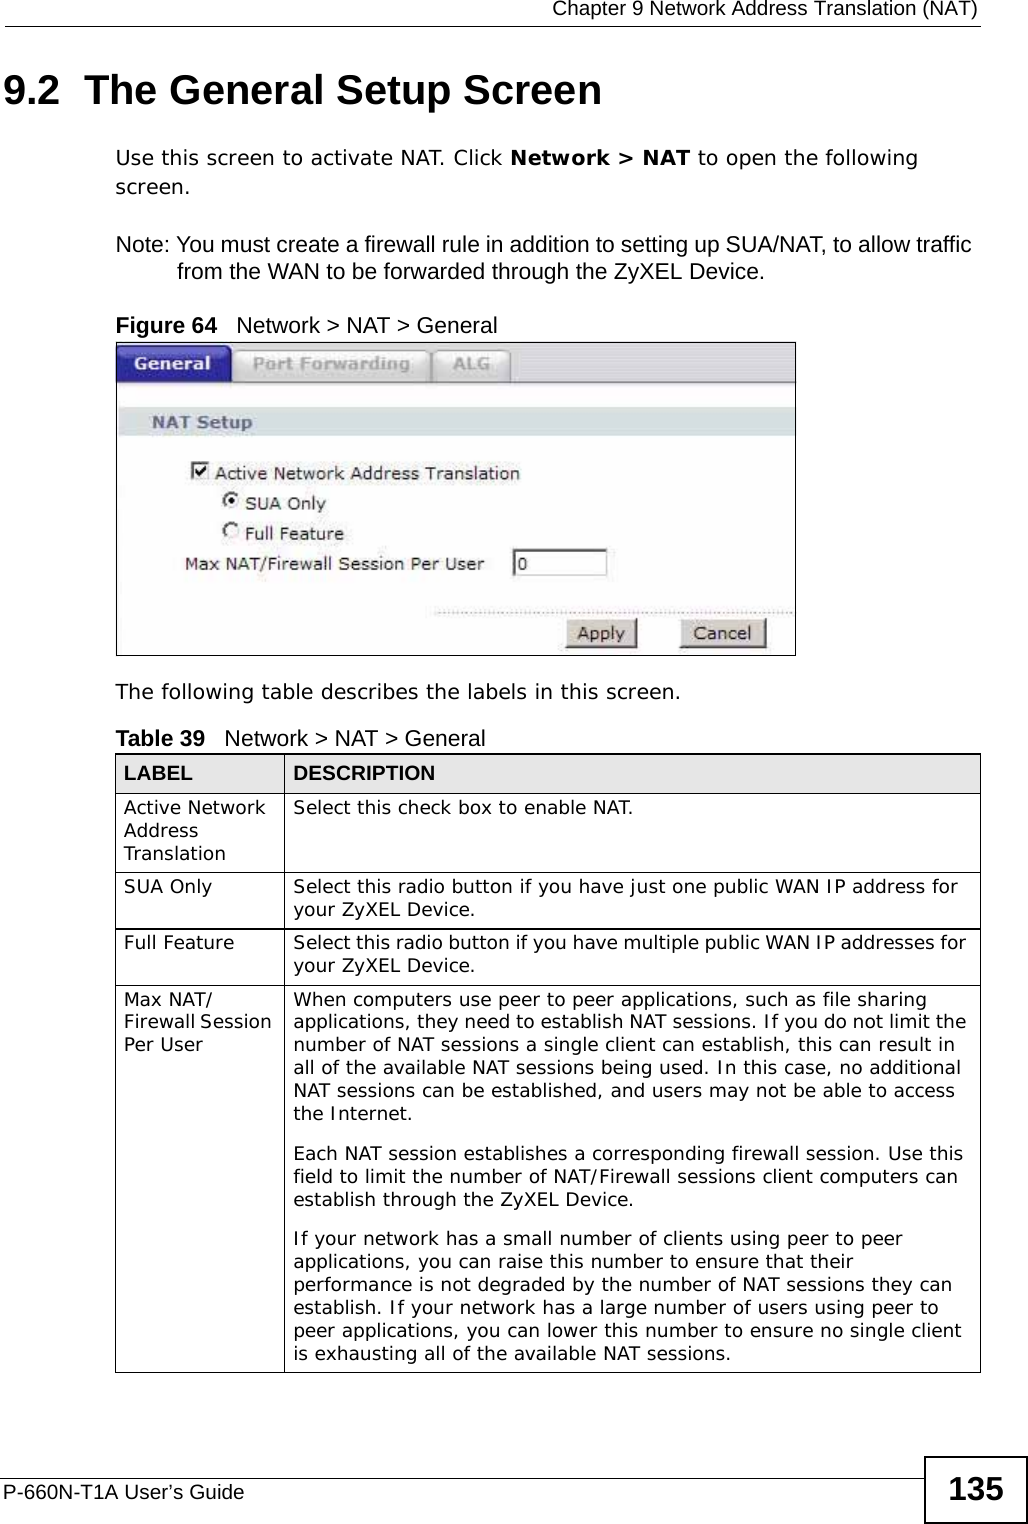  Chapter 9 Network Address Translation (NAT)P-660N-T1A User’s Guide 1359.2  The General Setup ScreenUse this screen to activate NAT. Click Network &gt; NAT to open the following screen.Note: You must create a firewall rule in addition to setting up SUA/NAT, to allow traffic from the WAN to be forwarded through the ZyXEL Device.Figure 64   Network &gt; NAT &gt; GeneralThe following table describes the labels in this screen.Table 39   Network &gt; NAT &gt; GeneralLABEL DESCRIPTIONActive Network Address Translation Select this check box to enable NAT.SUA Only Select this radio button if you have just one public WAN IP address for your ZyXEL Device.Full Feature  Select this radio button if you have multiple public WAN IP addresses for your ZyXEL Device.Max NAT/Firewall Session Per UserWhen computers use peer to peer applications, such as file sharing applications, they need to establish NAT sessions. If you do not limit the number of NAT sessions a single client can establish, this can result in all of the available NAT sessions being used. In this case, no additional NAT sessions can be established, and users may not be able to access the Internet.Each NAT session establishes a corresponding firewall session. Use this field to limit the number of NAT/Firewall sessions client computers can establish through the ZyXEL Device.If your network has a small number of clients using peer to peer applications, you can raise this number to ensure that their performance is not degraded by the number of NAT sessions they can establish. If your network has a large number of users using peer to peer applications, you can lower this number to ensure no single client is exhausting all of the available NAT sessions.